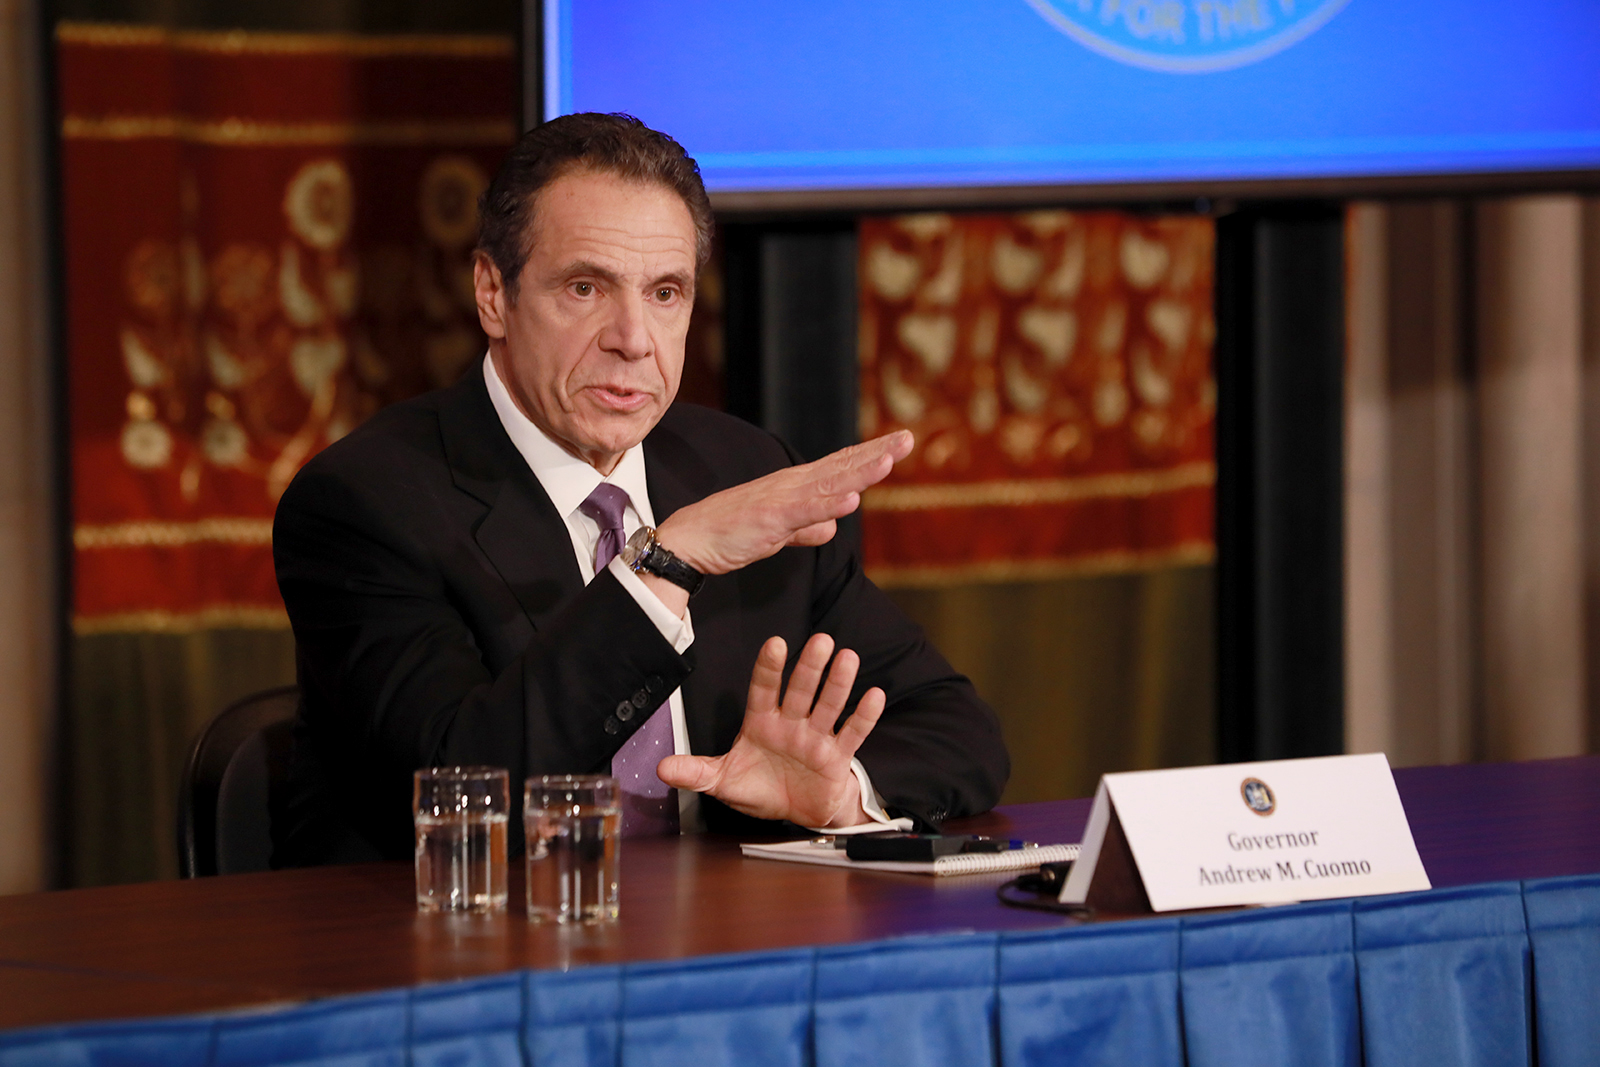 New York Gov. Andrew Cuomo gives his press briefing about the coronavirus crisis on April 17 in Albany, New York.